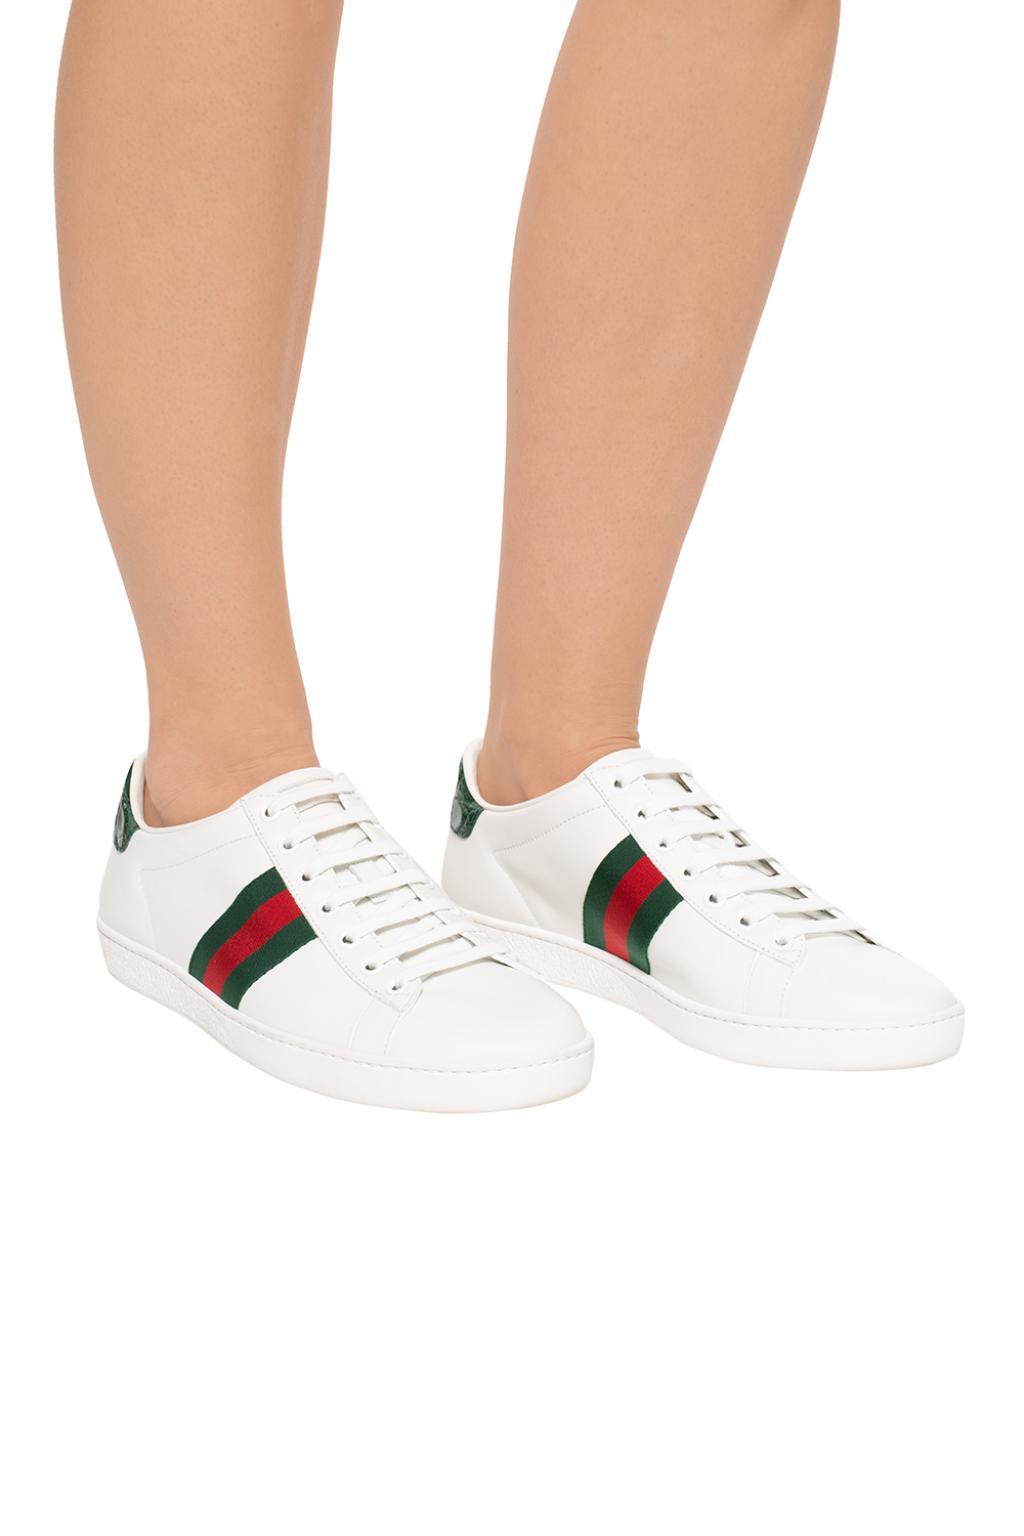 gucci striped shoes